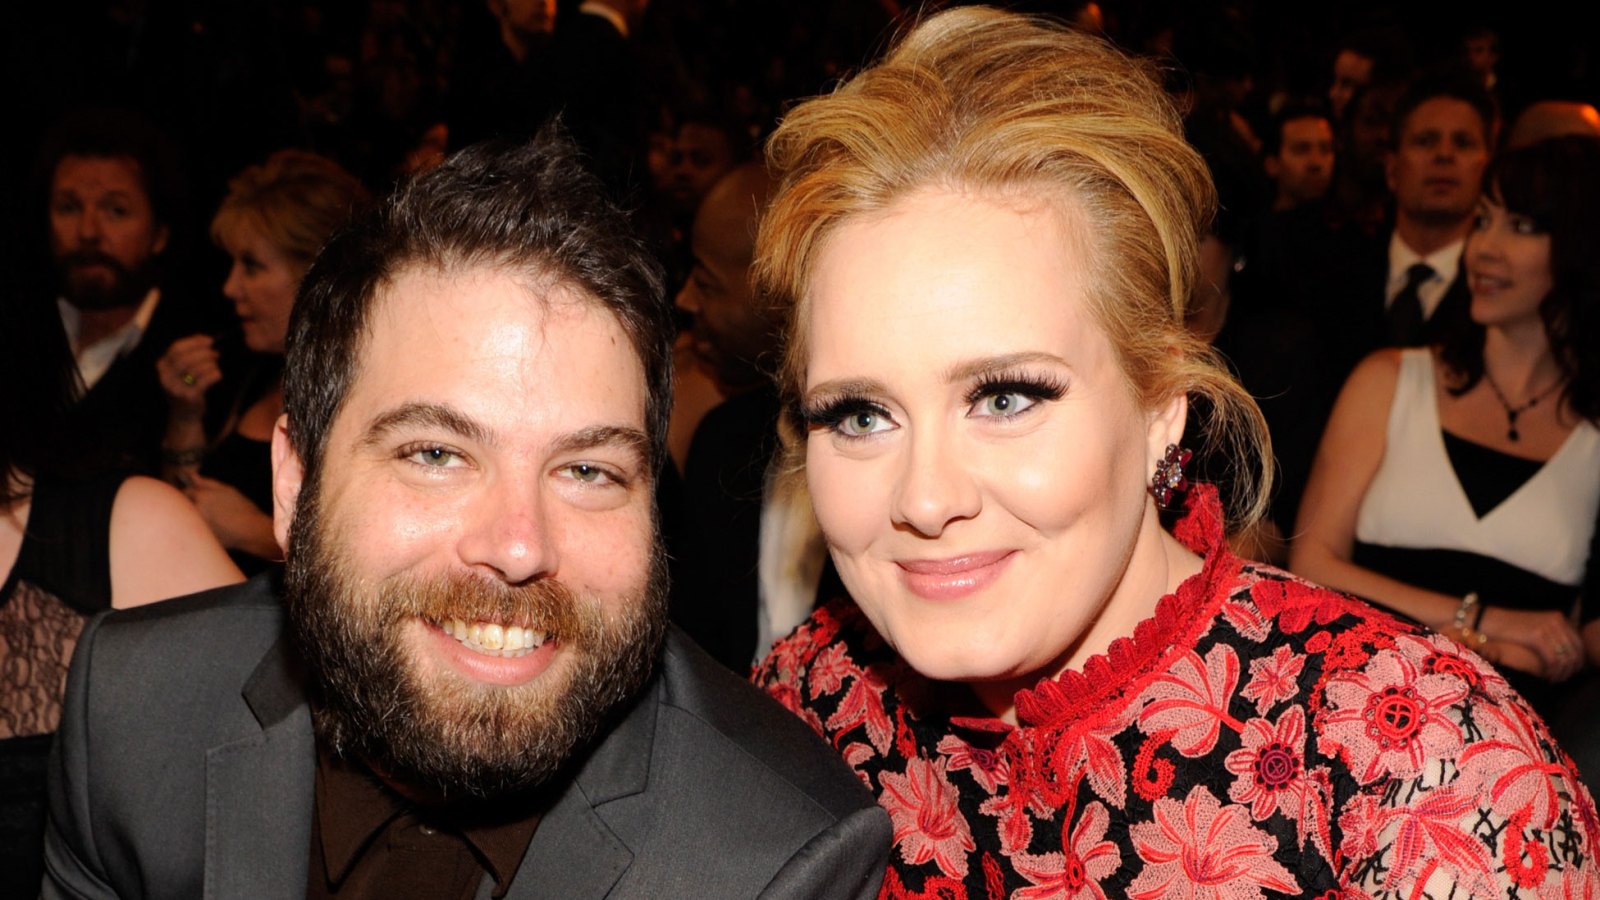 Adele Gave Her L.A. Home to Simon Konecki 2 Months Before Split